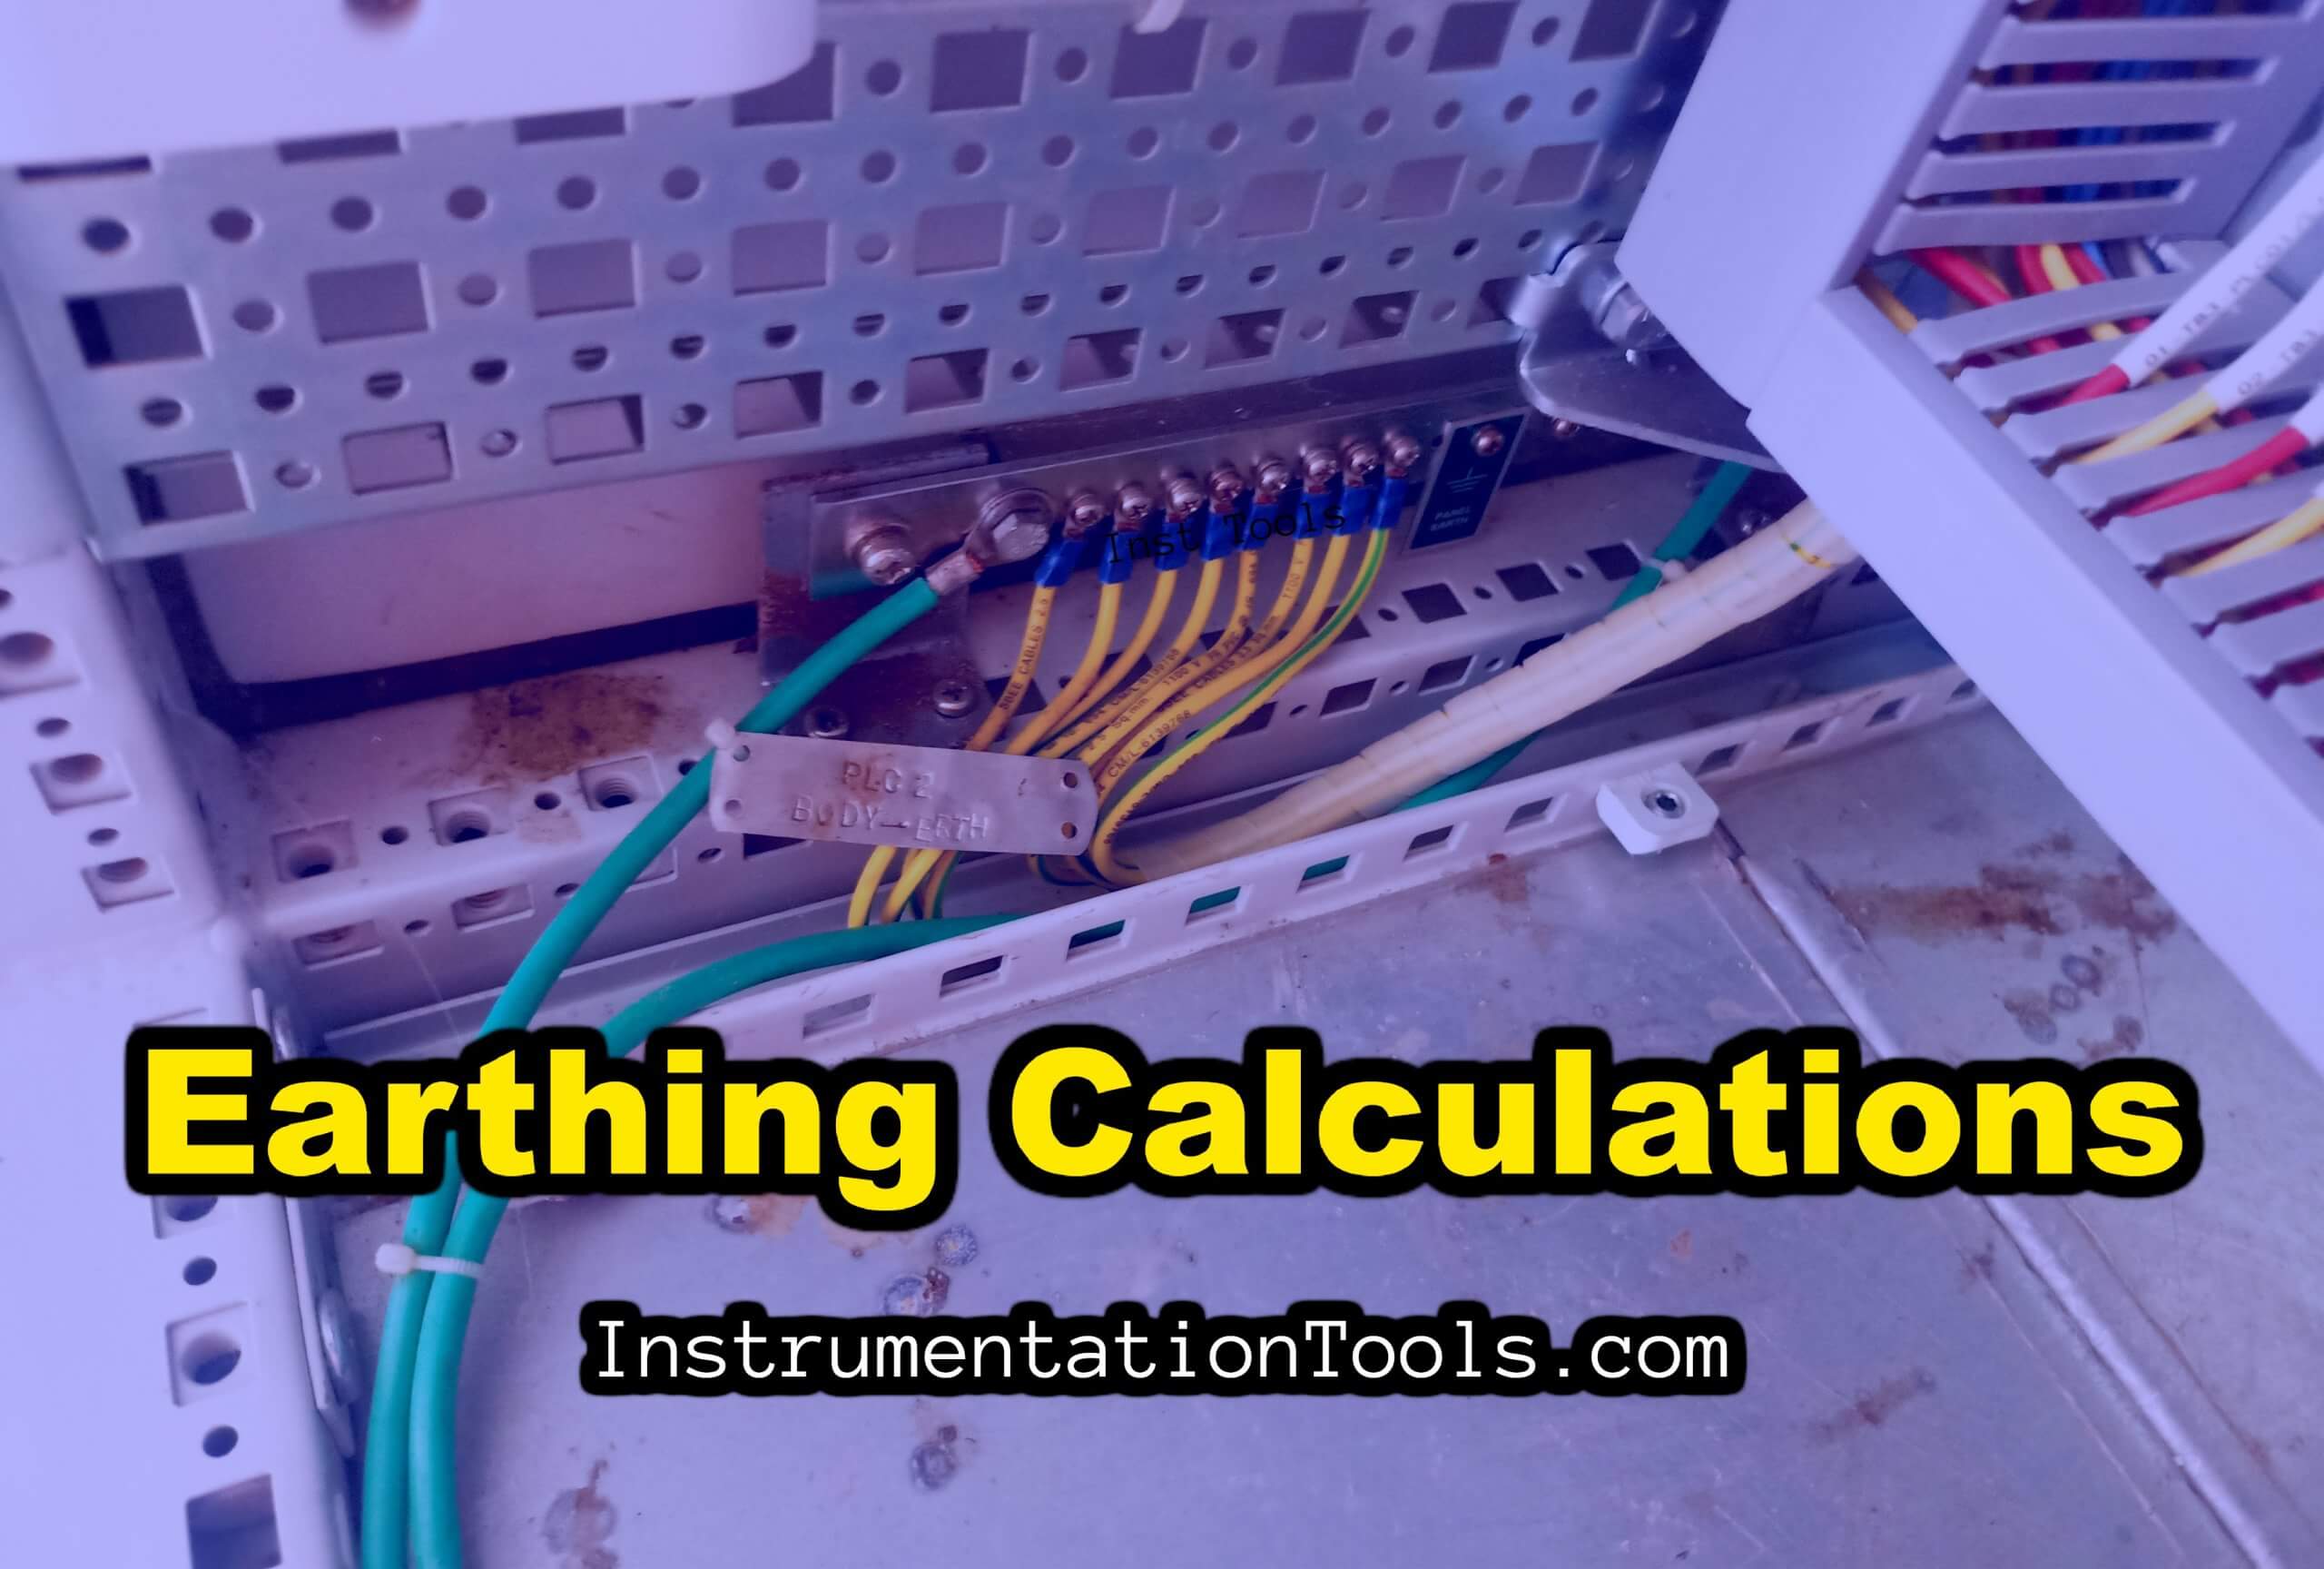 Earthing Calculations